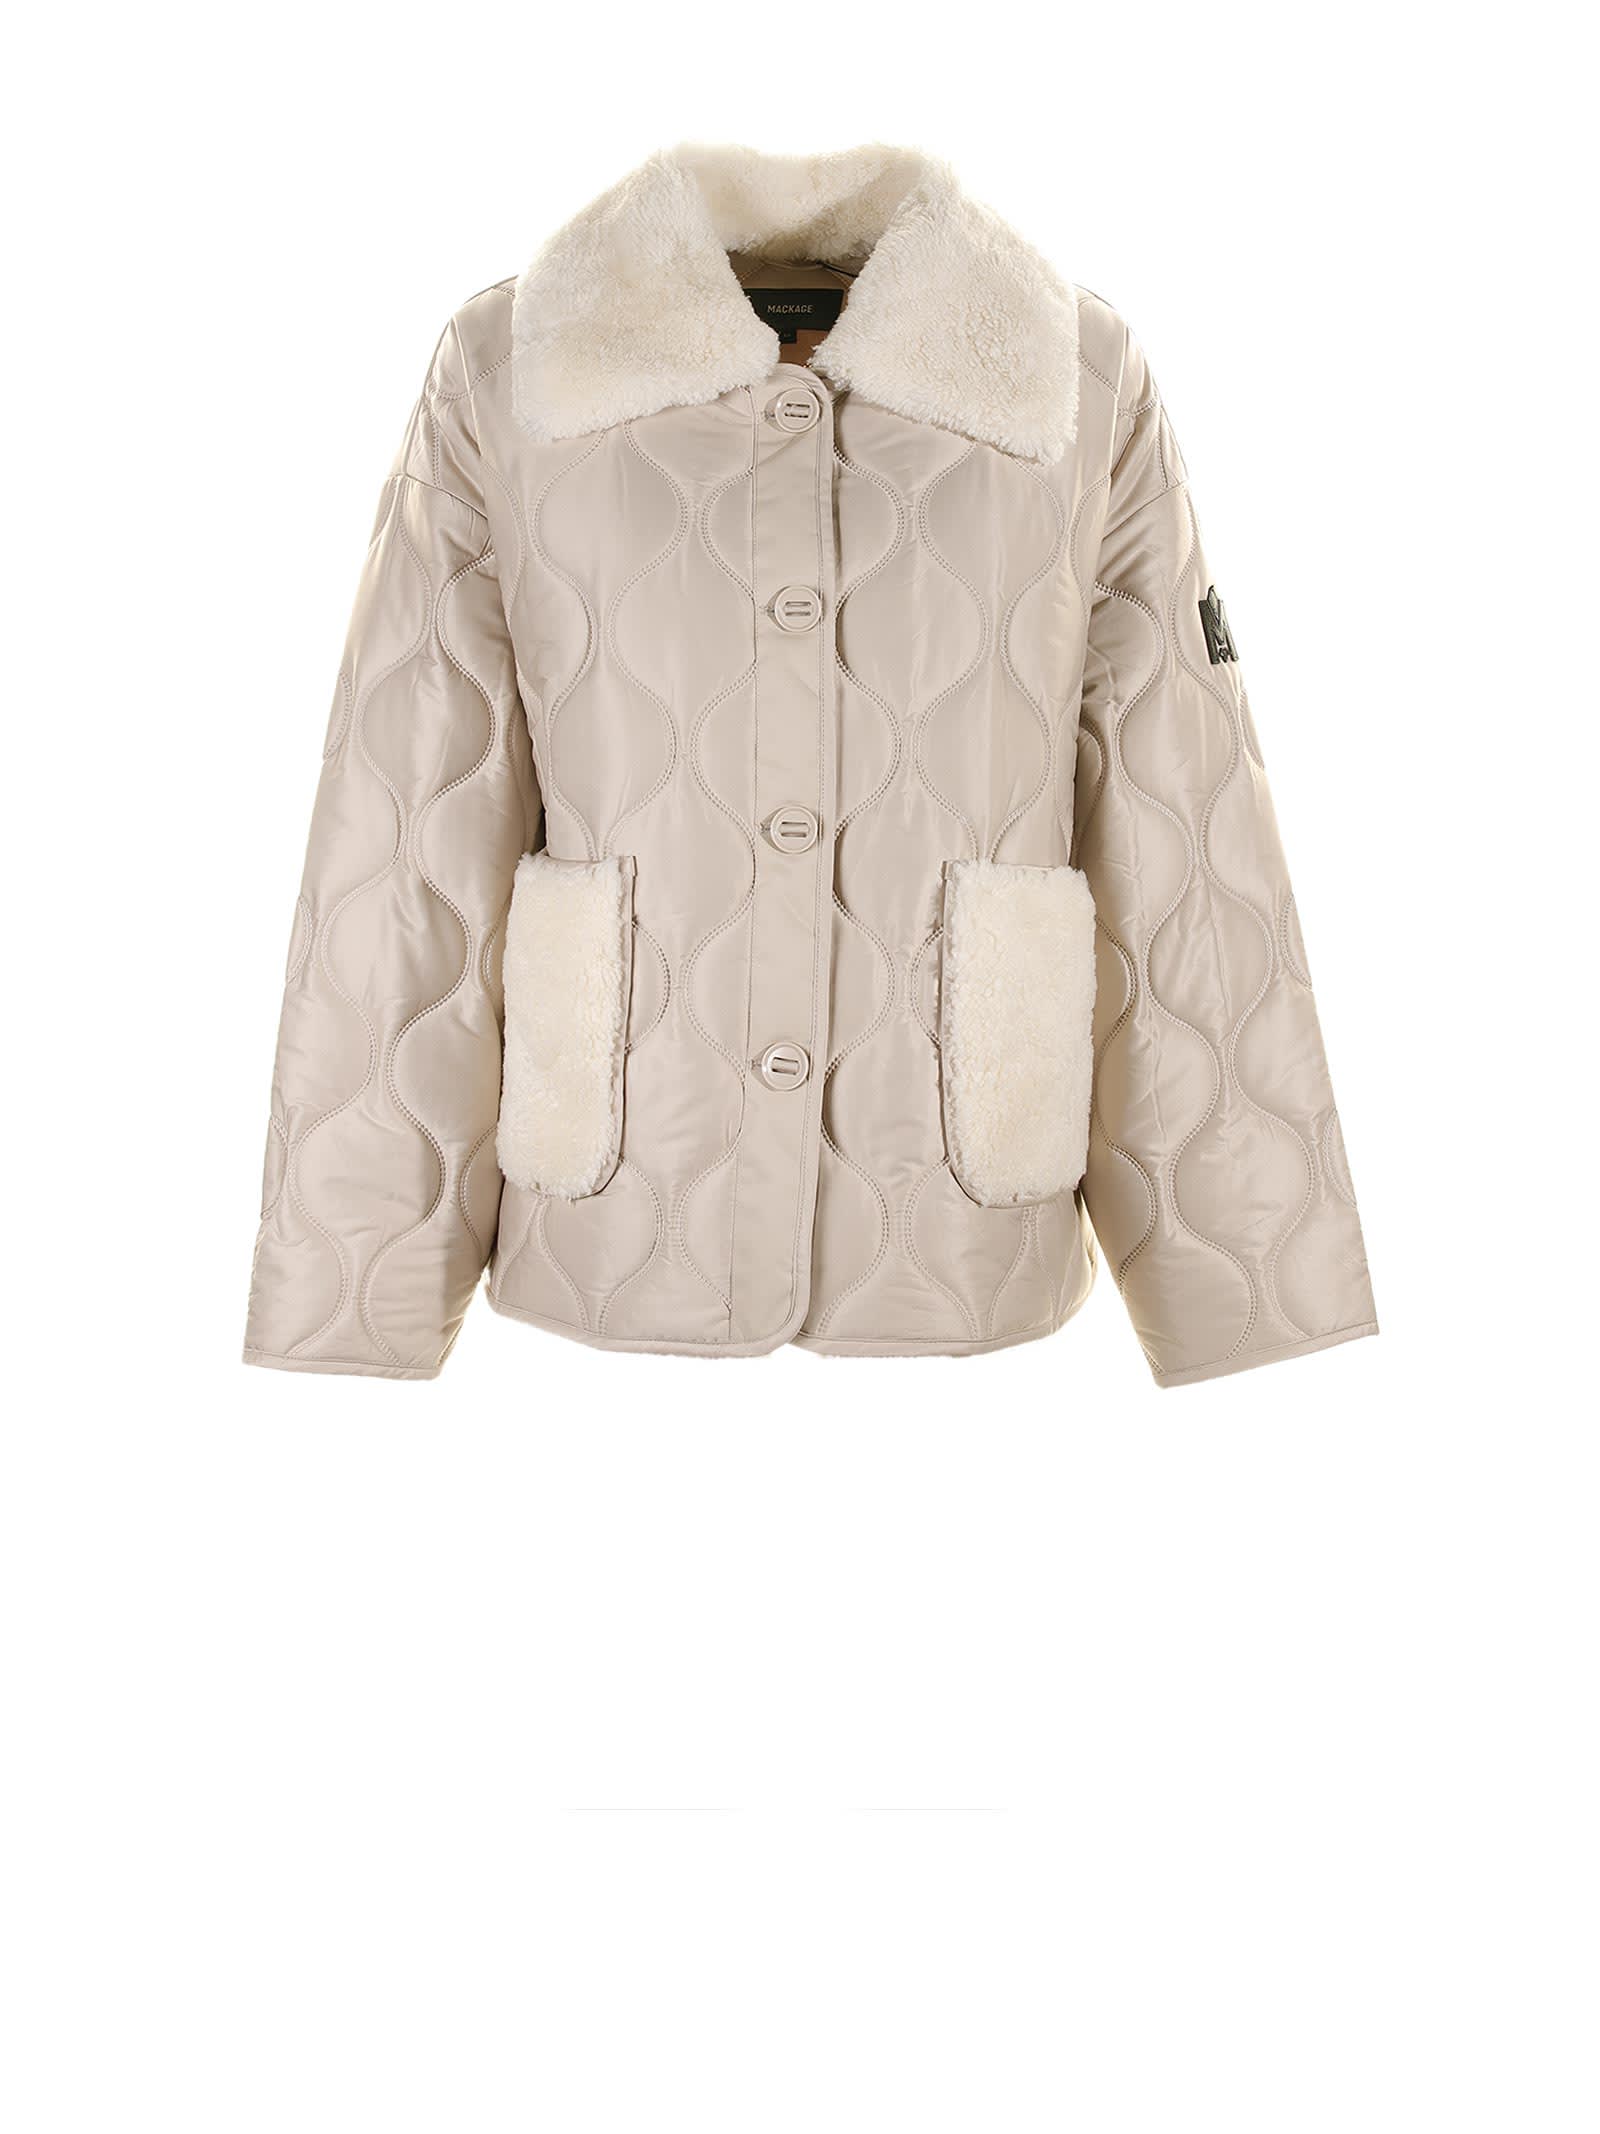 MACKAGE KENZY DOWN JACKET WITH SHEARLING POCKETS